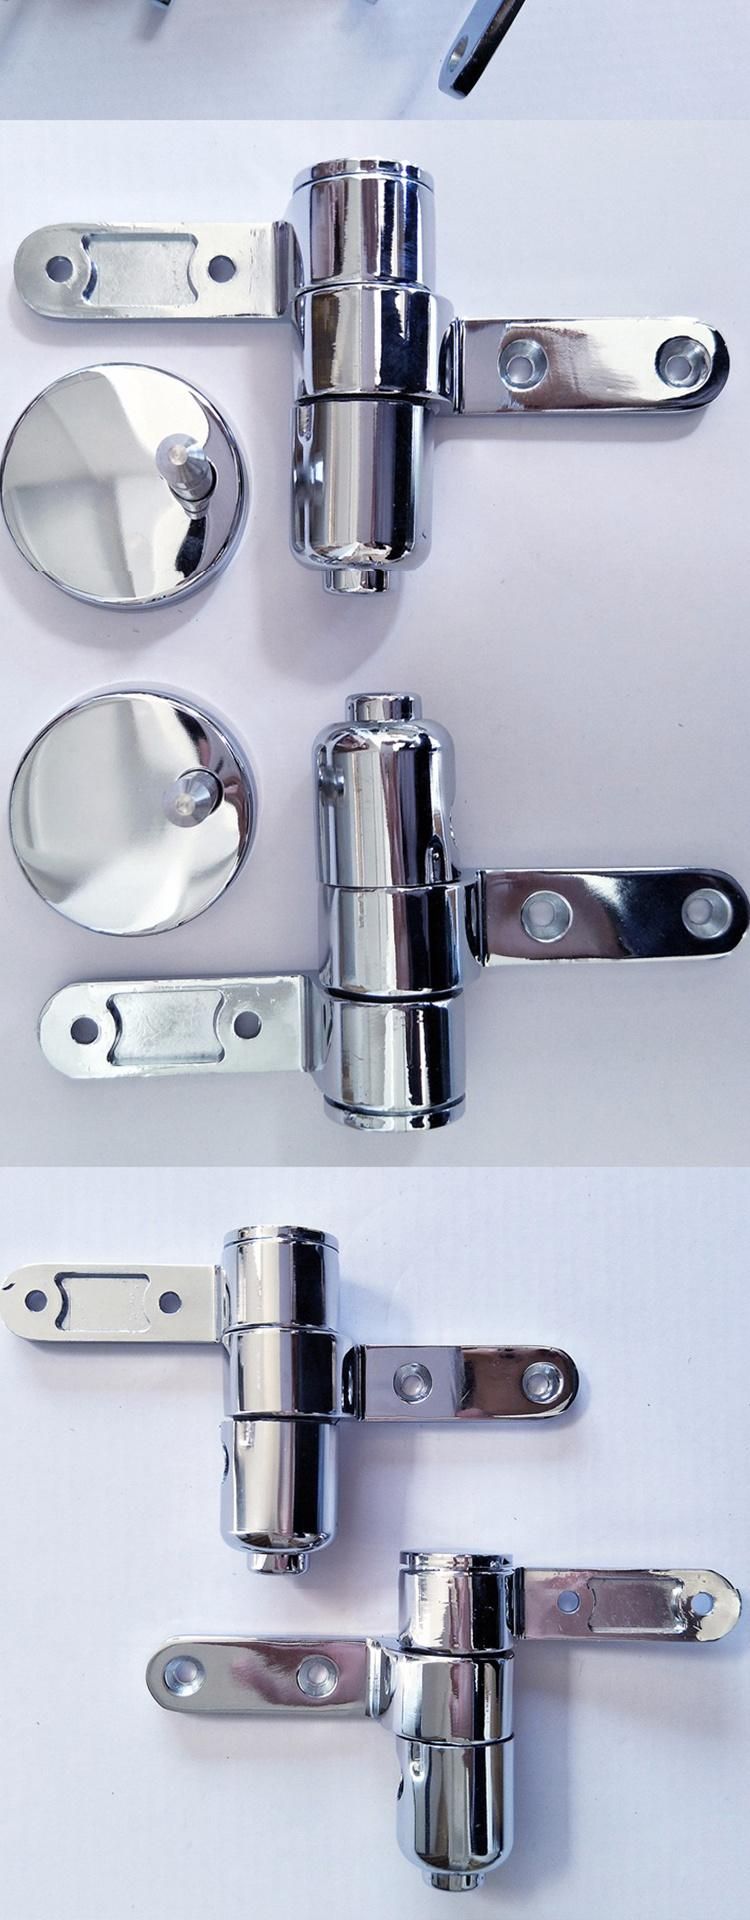 High Quality Stainless Steel Soft Close Hinges for Toilet Seat